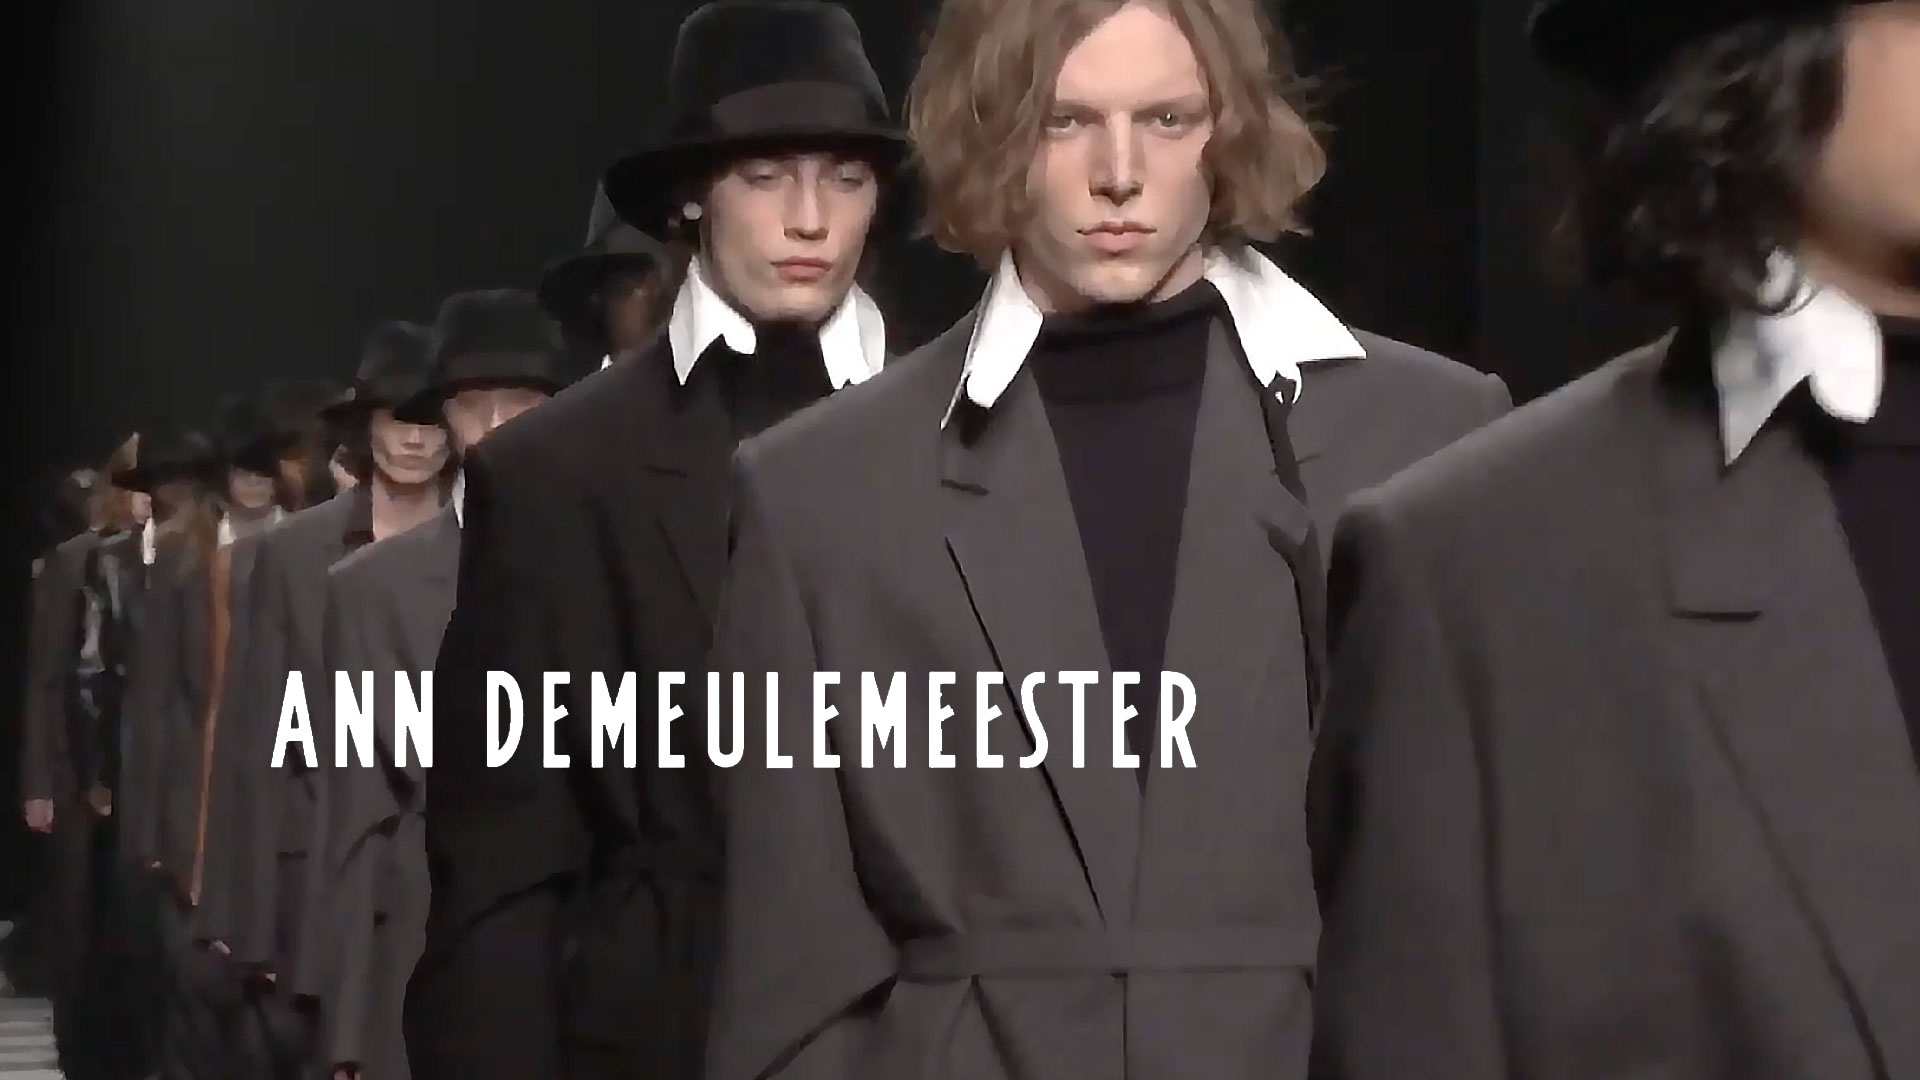 FALL-WINTER 2022/2023 ANN DEMEULEMEERSTER PARIS READY-TO-WEAR COLLECTION